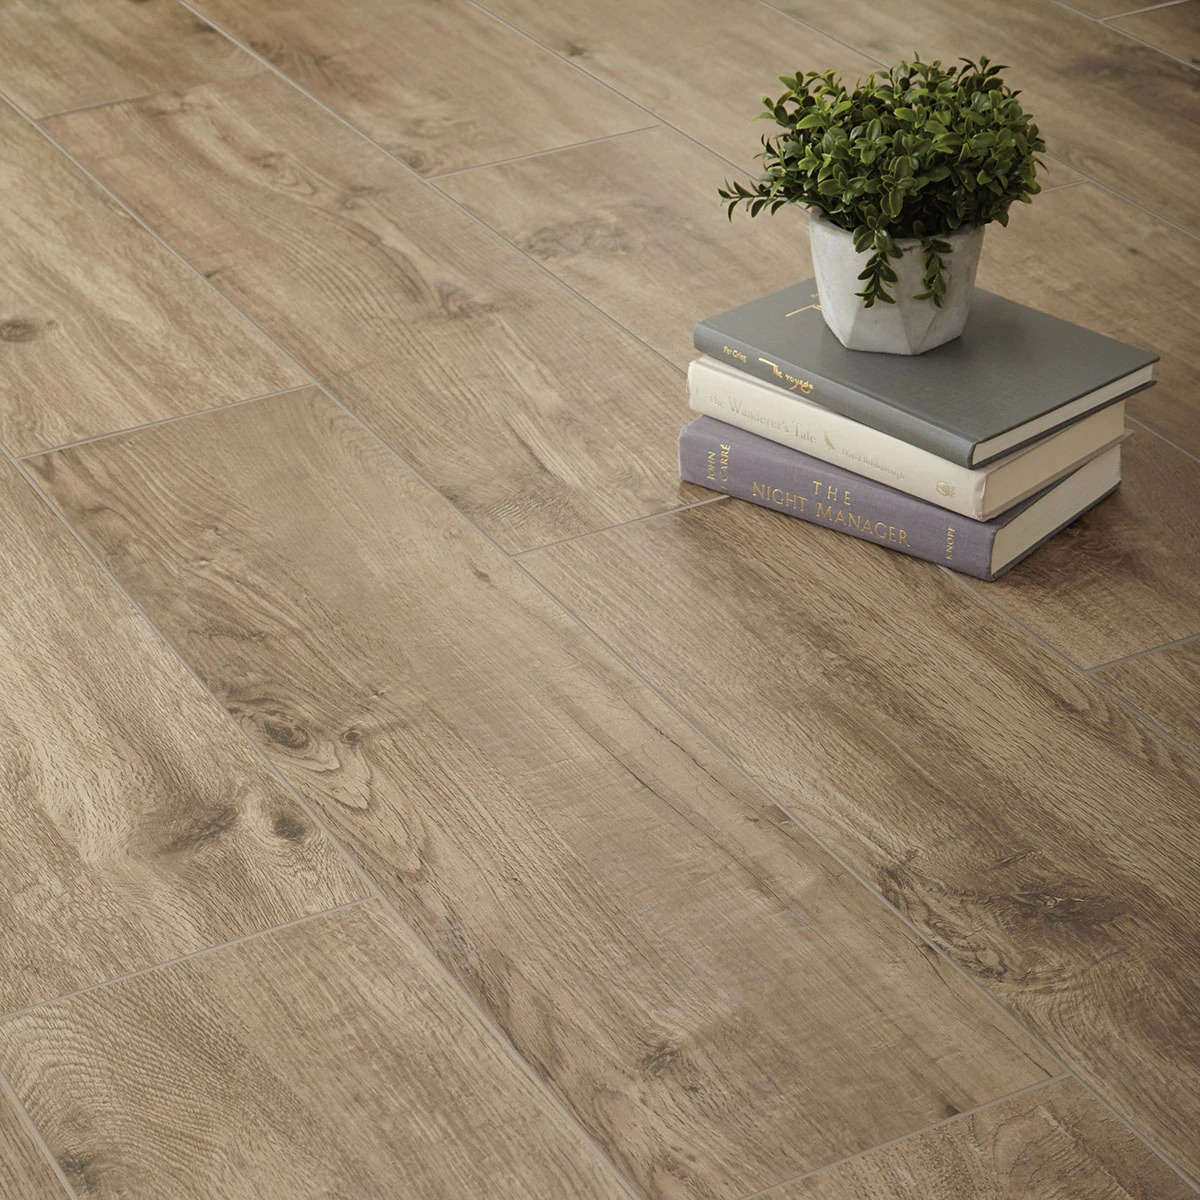 What Are Loose Lay Vinyl Flooring and Pros?